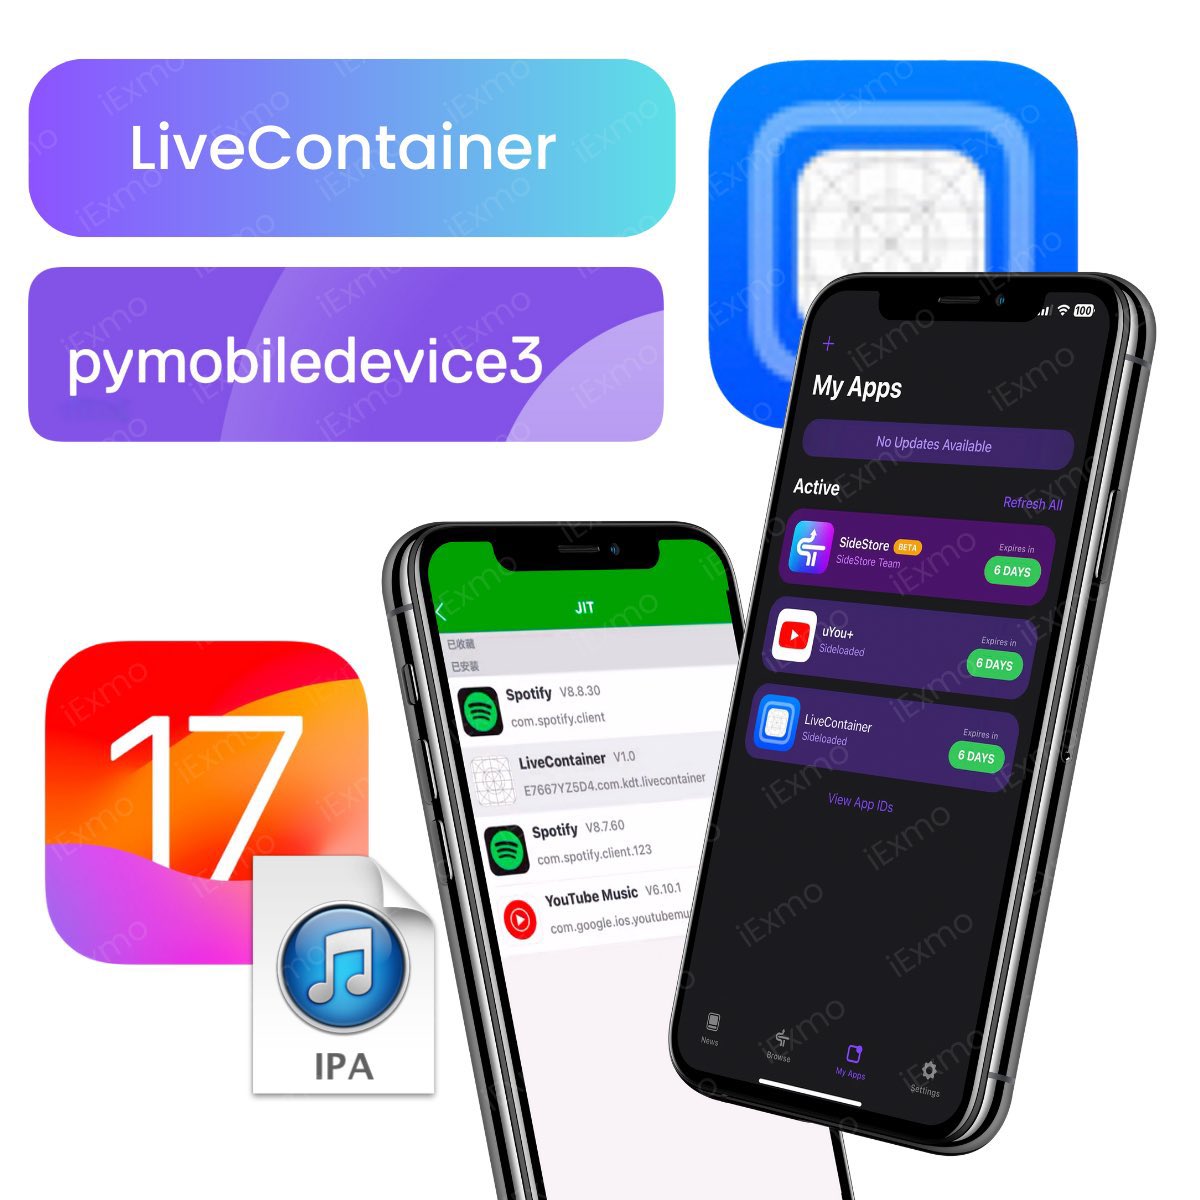 LiveContainer for iOS 17✅

Allowing users to install unlimited apps (bypassing the 10 apps limit of free developer accounts) even on #iOS 17.4.1🚀

Download: iexmo.com/ipastore/troll…

Tweaked Apps: iexmo.com/updates/ios-17…

Best alternative to #TrollStore installation on #iOS17 🛠️